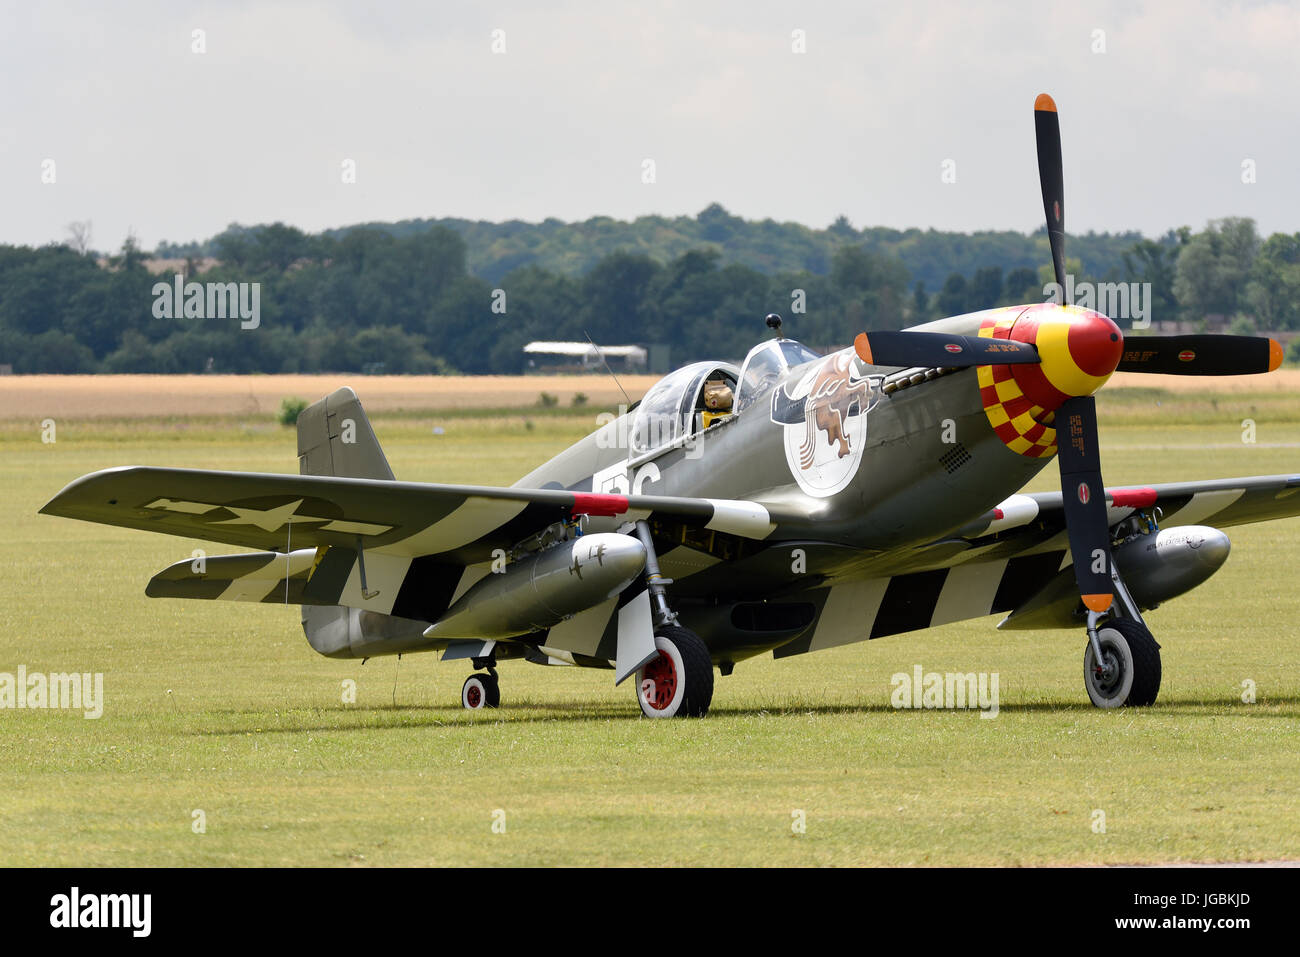 North American P-51B plane named Berlin Express which has flown from the US to appear at airshows in the UK. Duxford, Cambs. Stock Photo